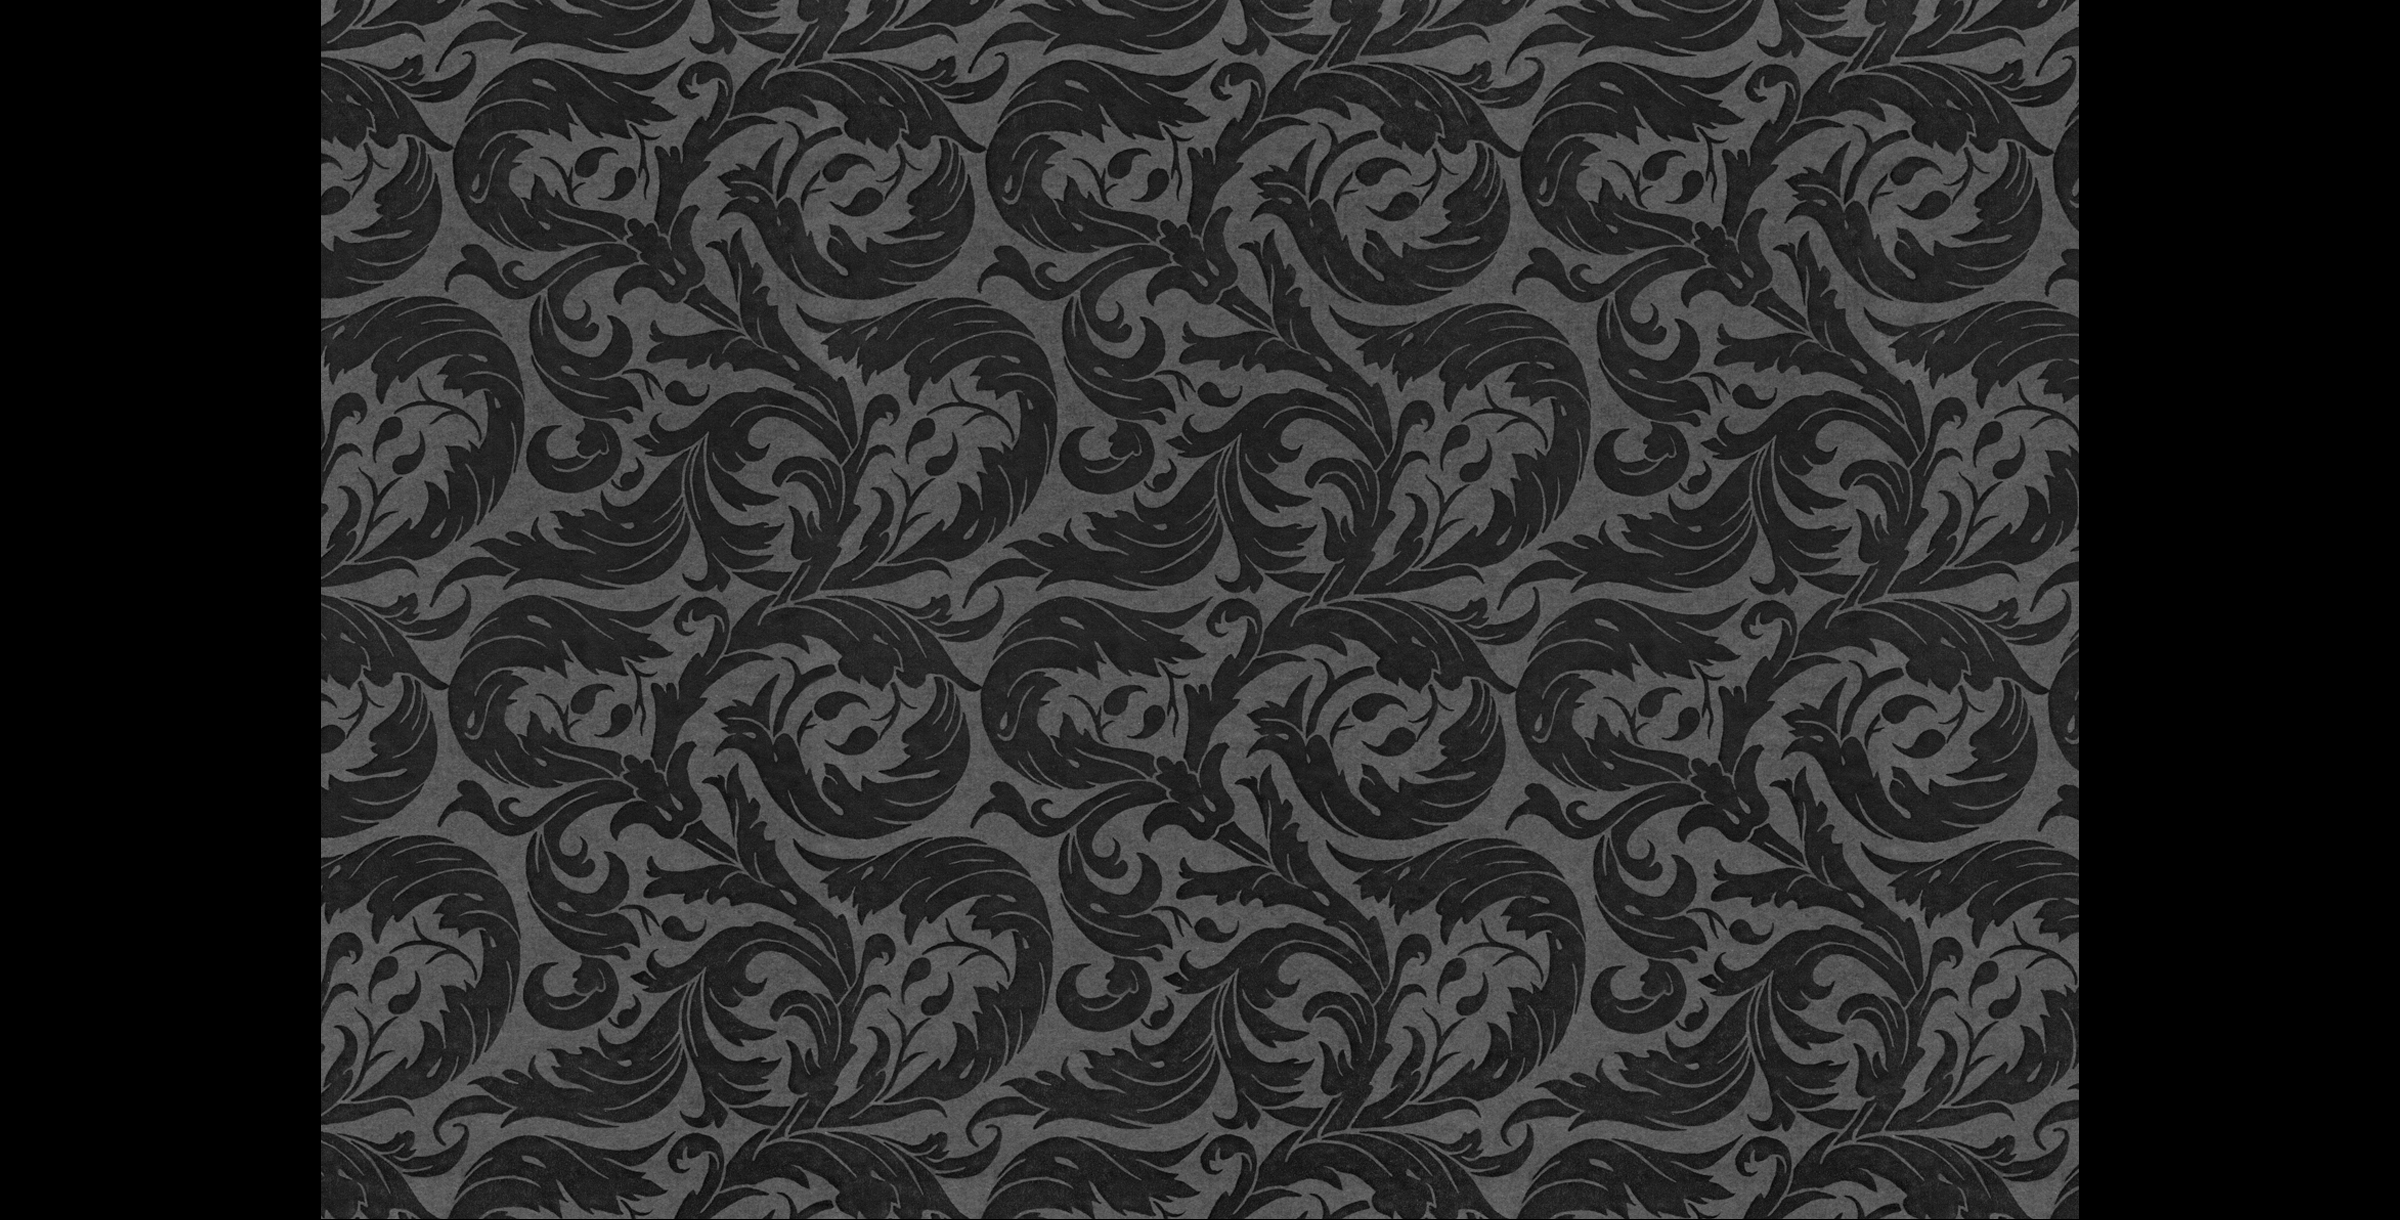   Acanthus Leaf Pattern. Journal pastedown endpapers and gift wrap.  1994. Pen and ink. Produced for Mudlark Papers, Chicago, IL. 